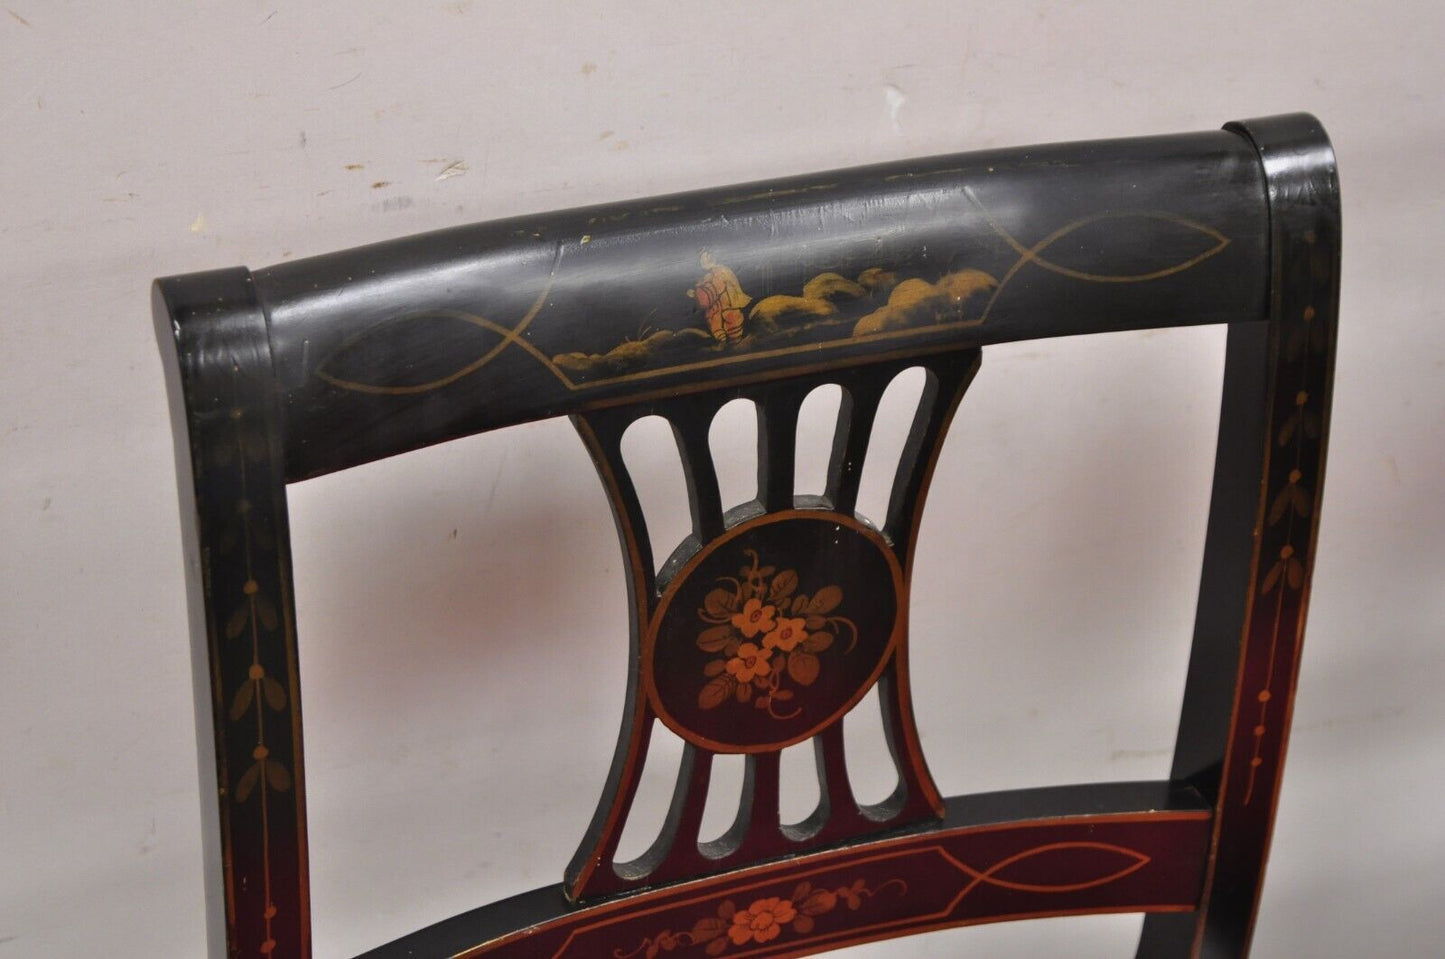 Vintage Chinoiserie English Regency Style Black Painted Dining Chairs - Set of 6